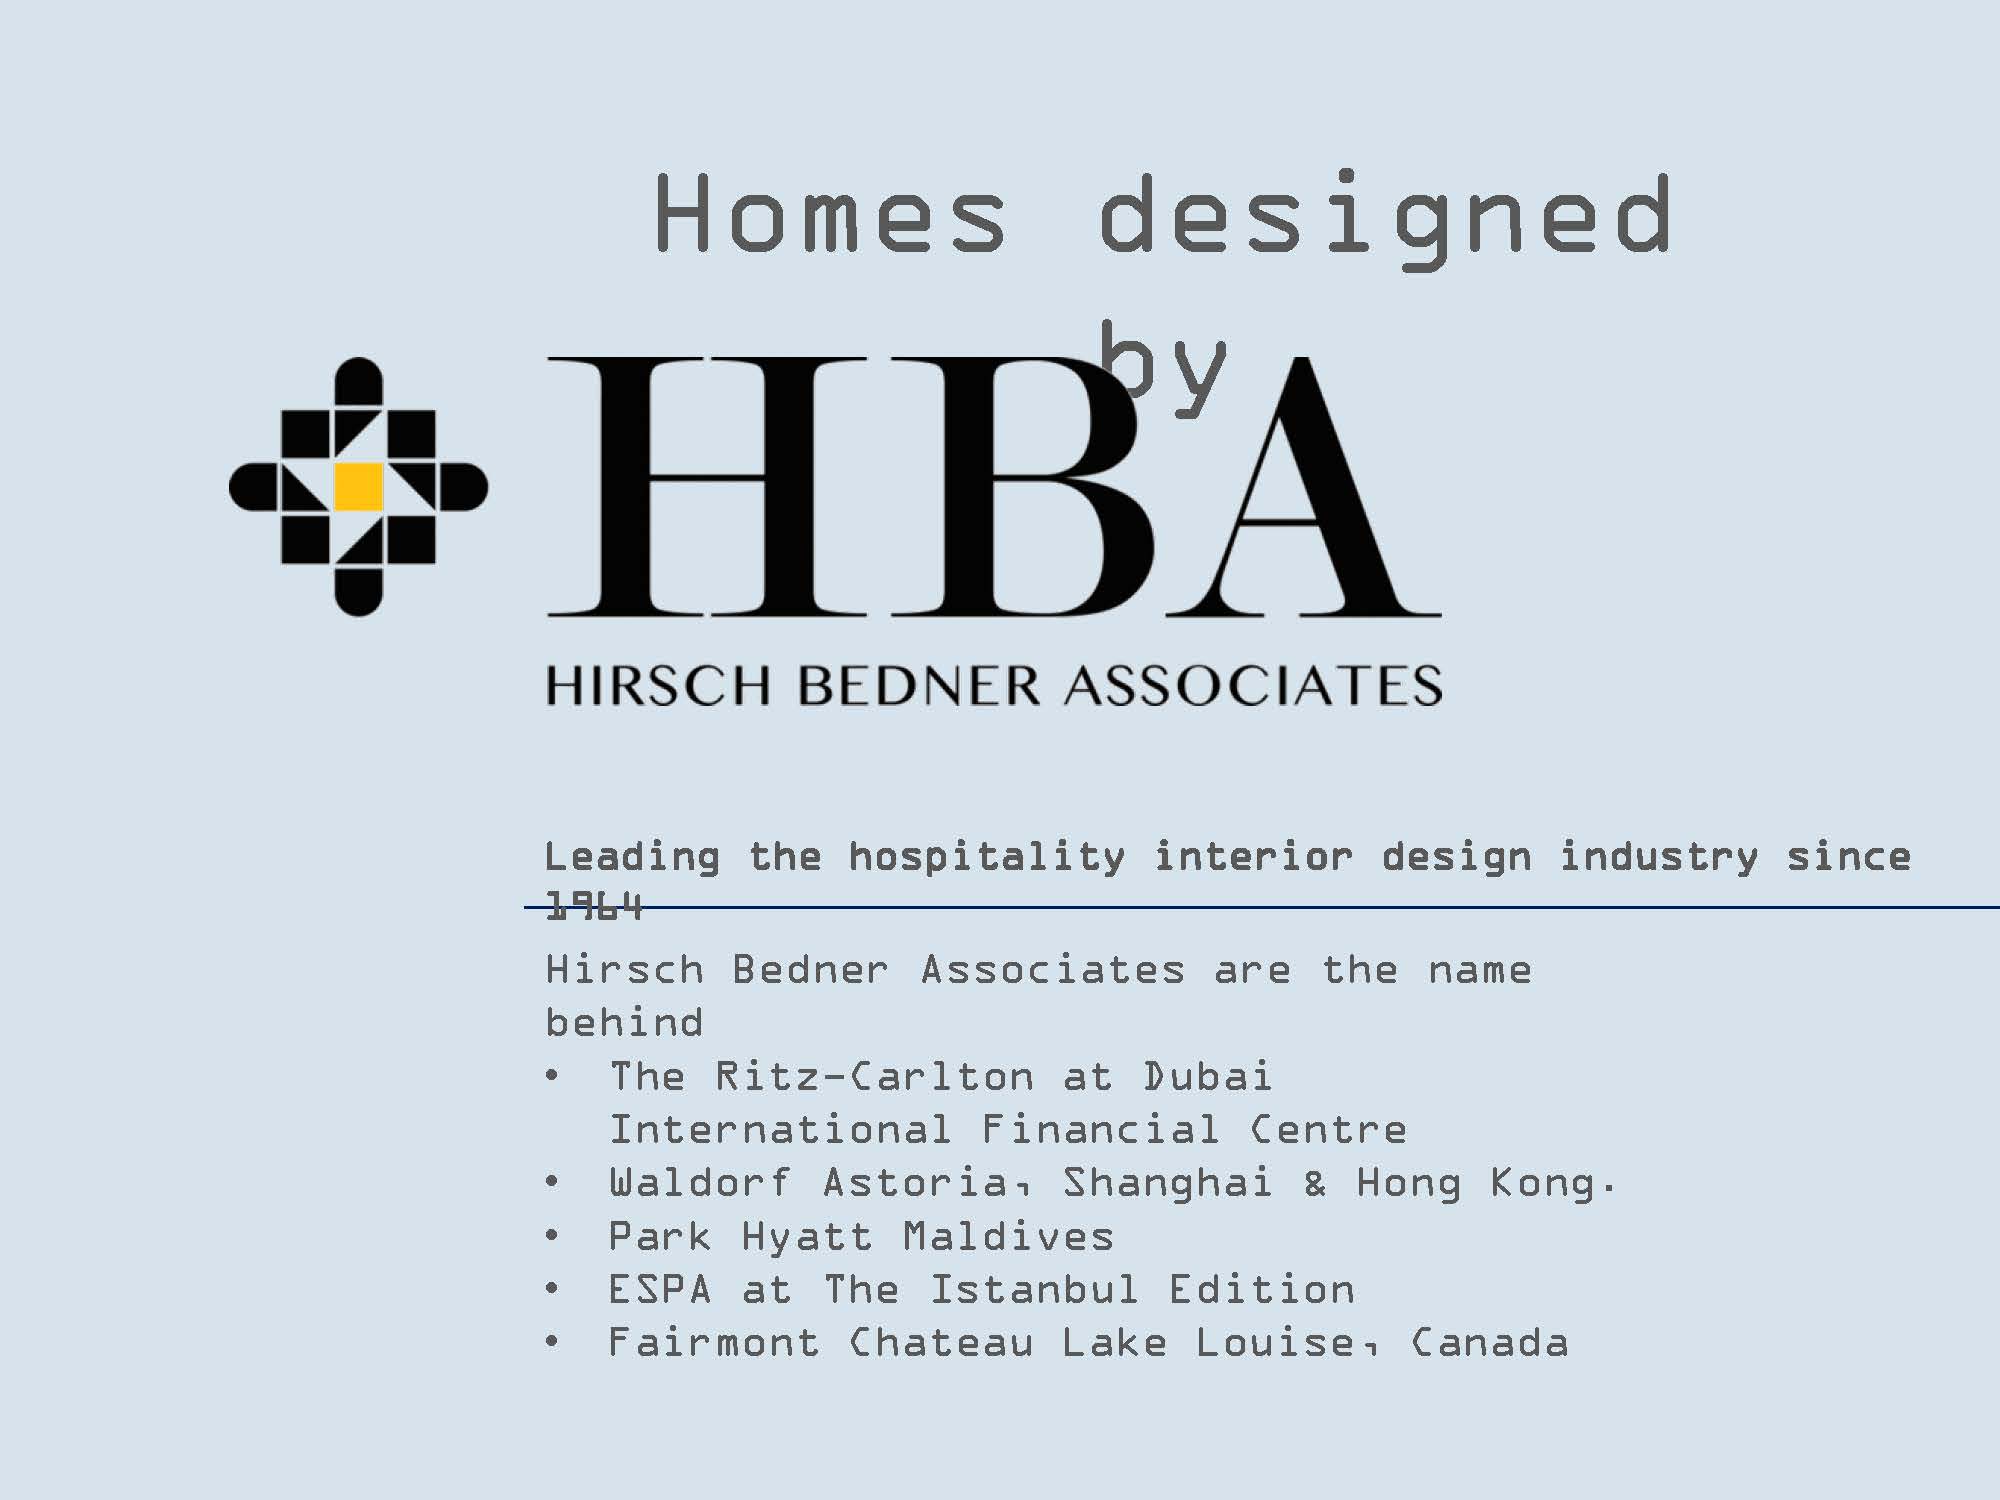 Omkar homes are designed by HBA